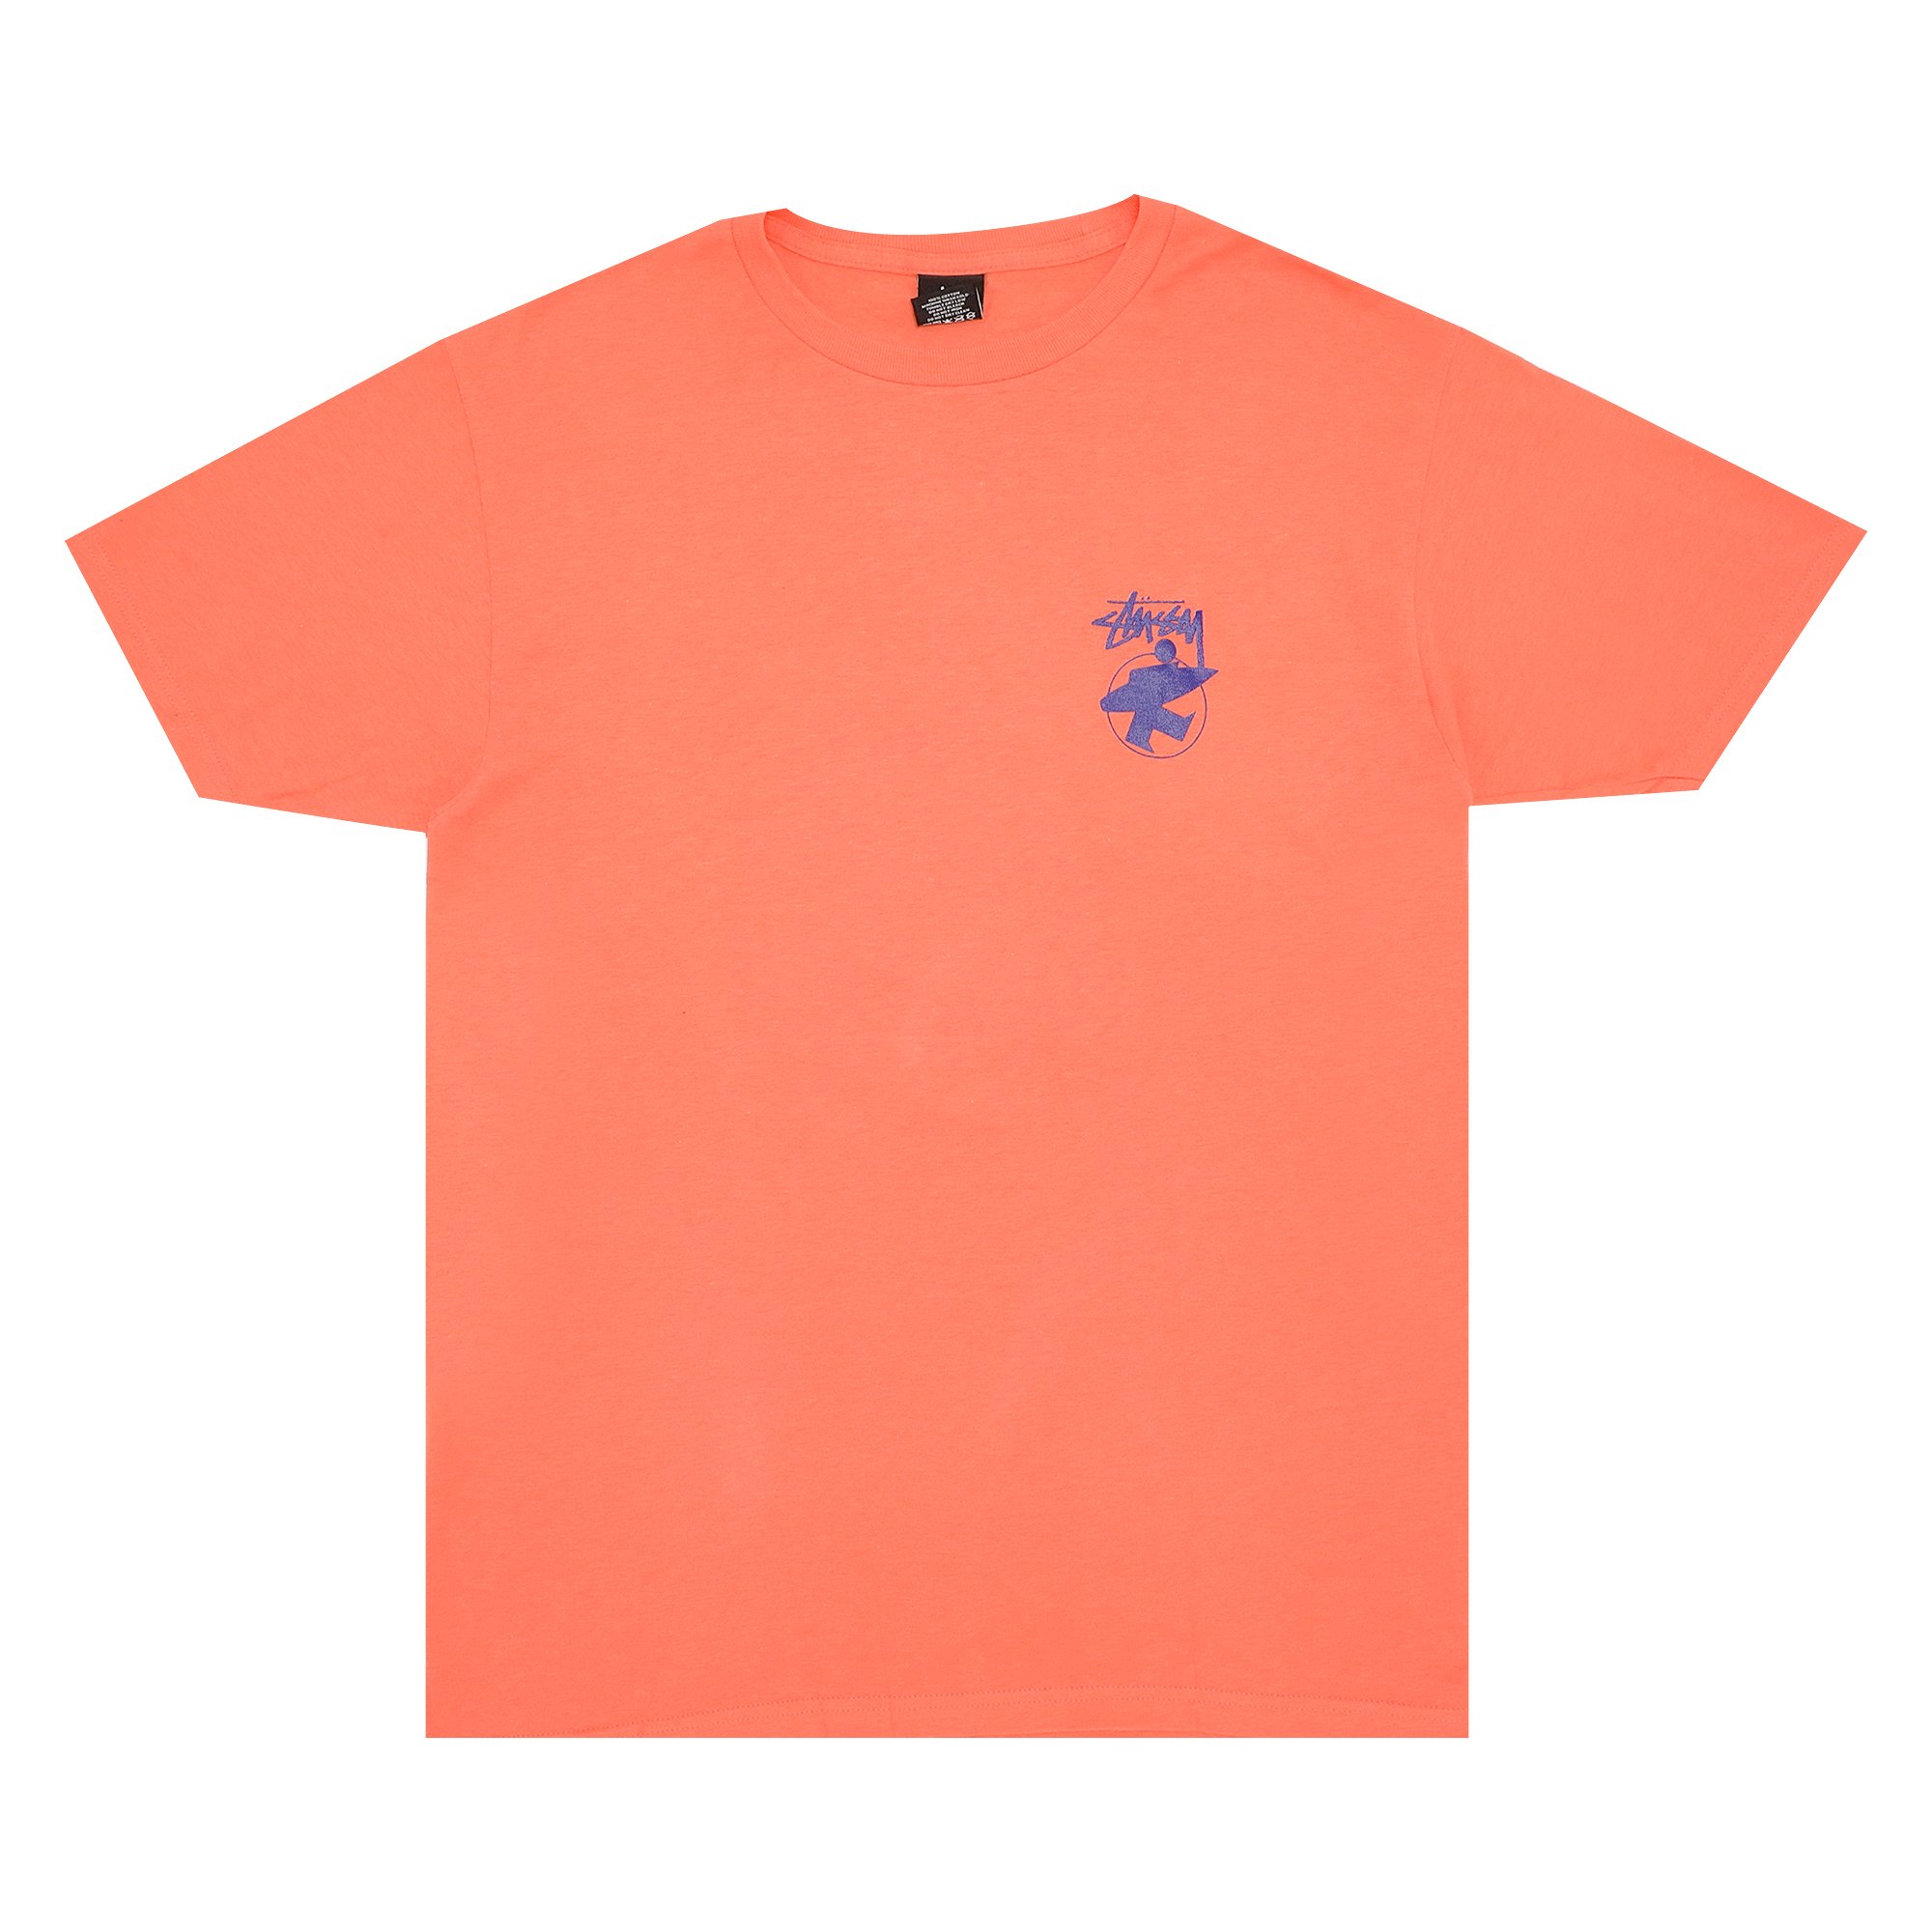 Buy Stussy Surfman Fade Tee 'Pale Red' - 1903046 PALE | GOAT